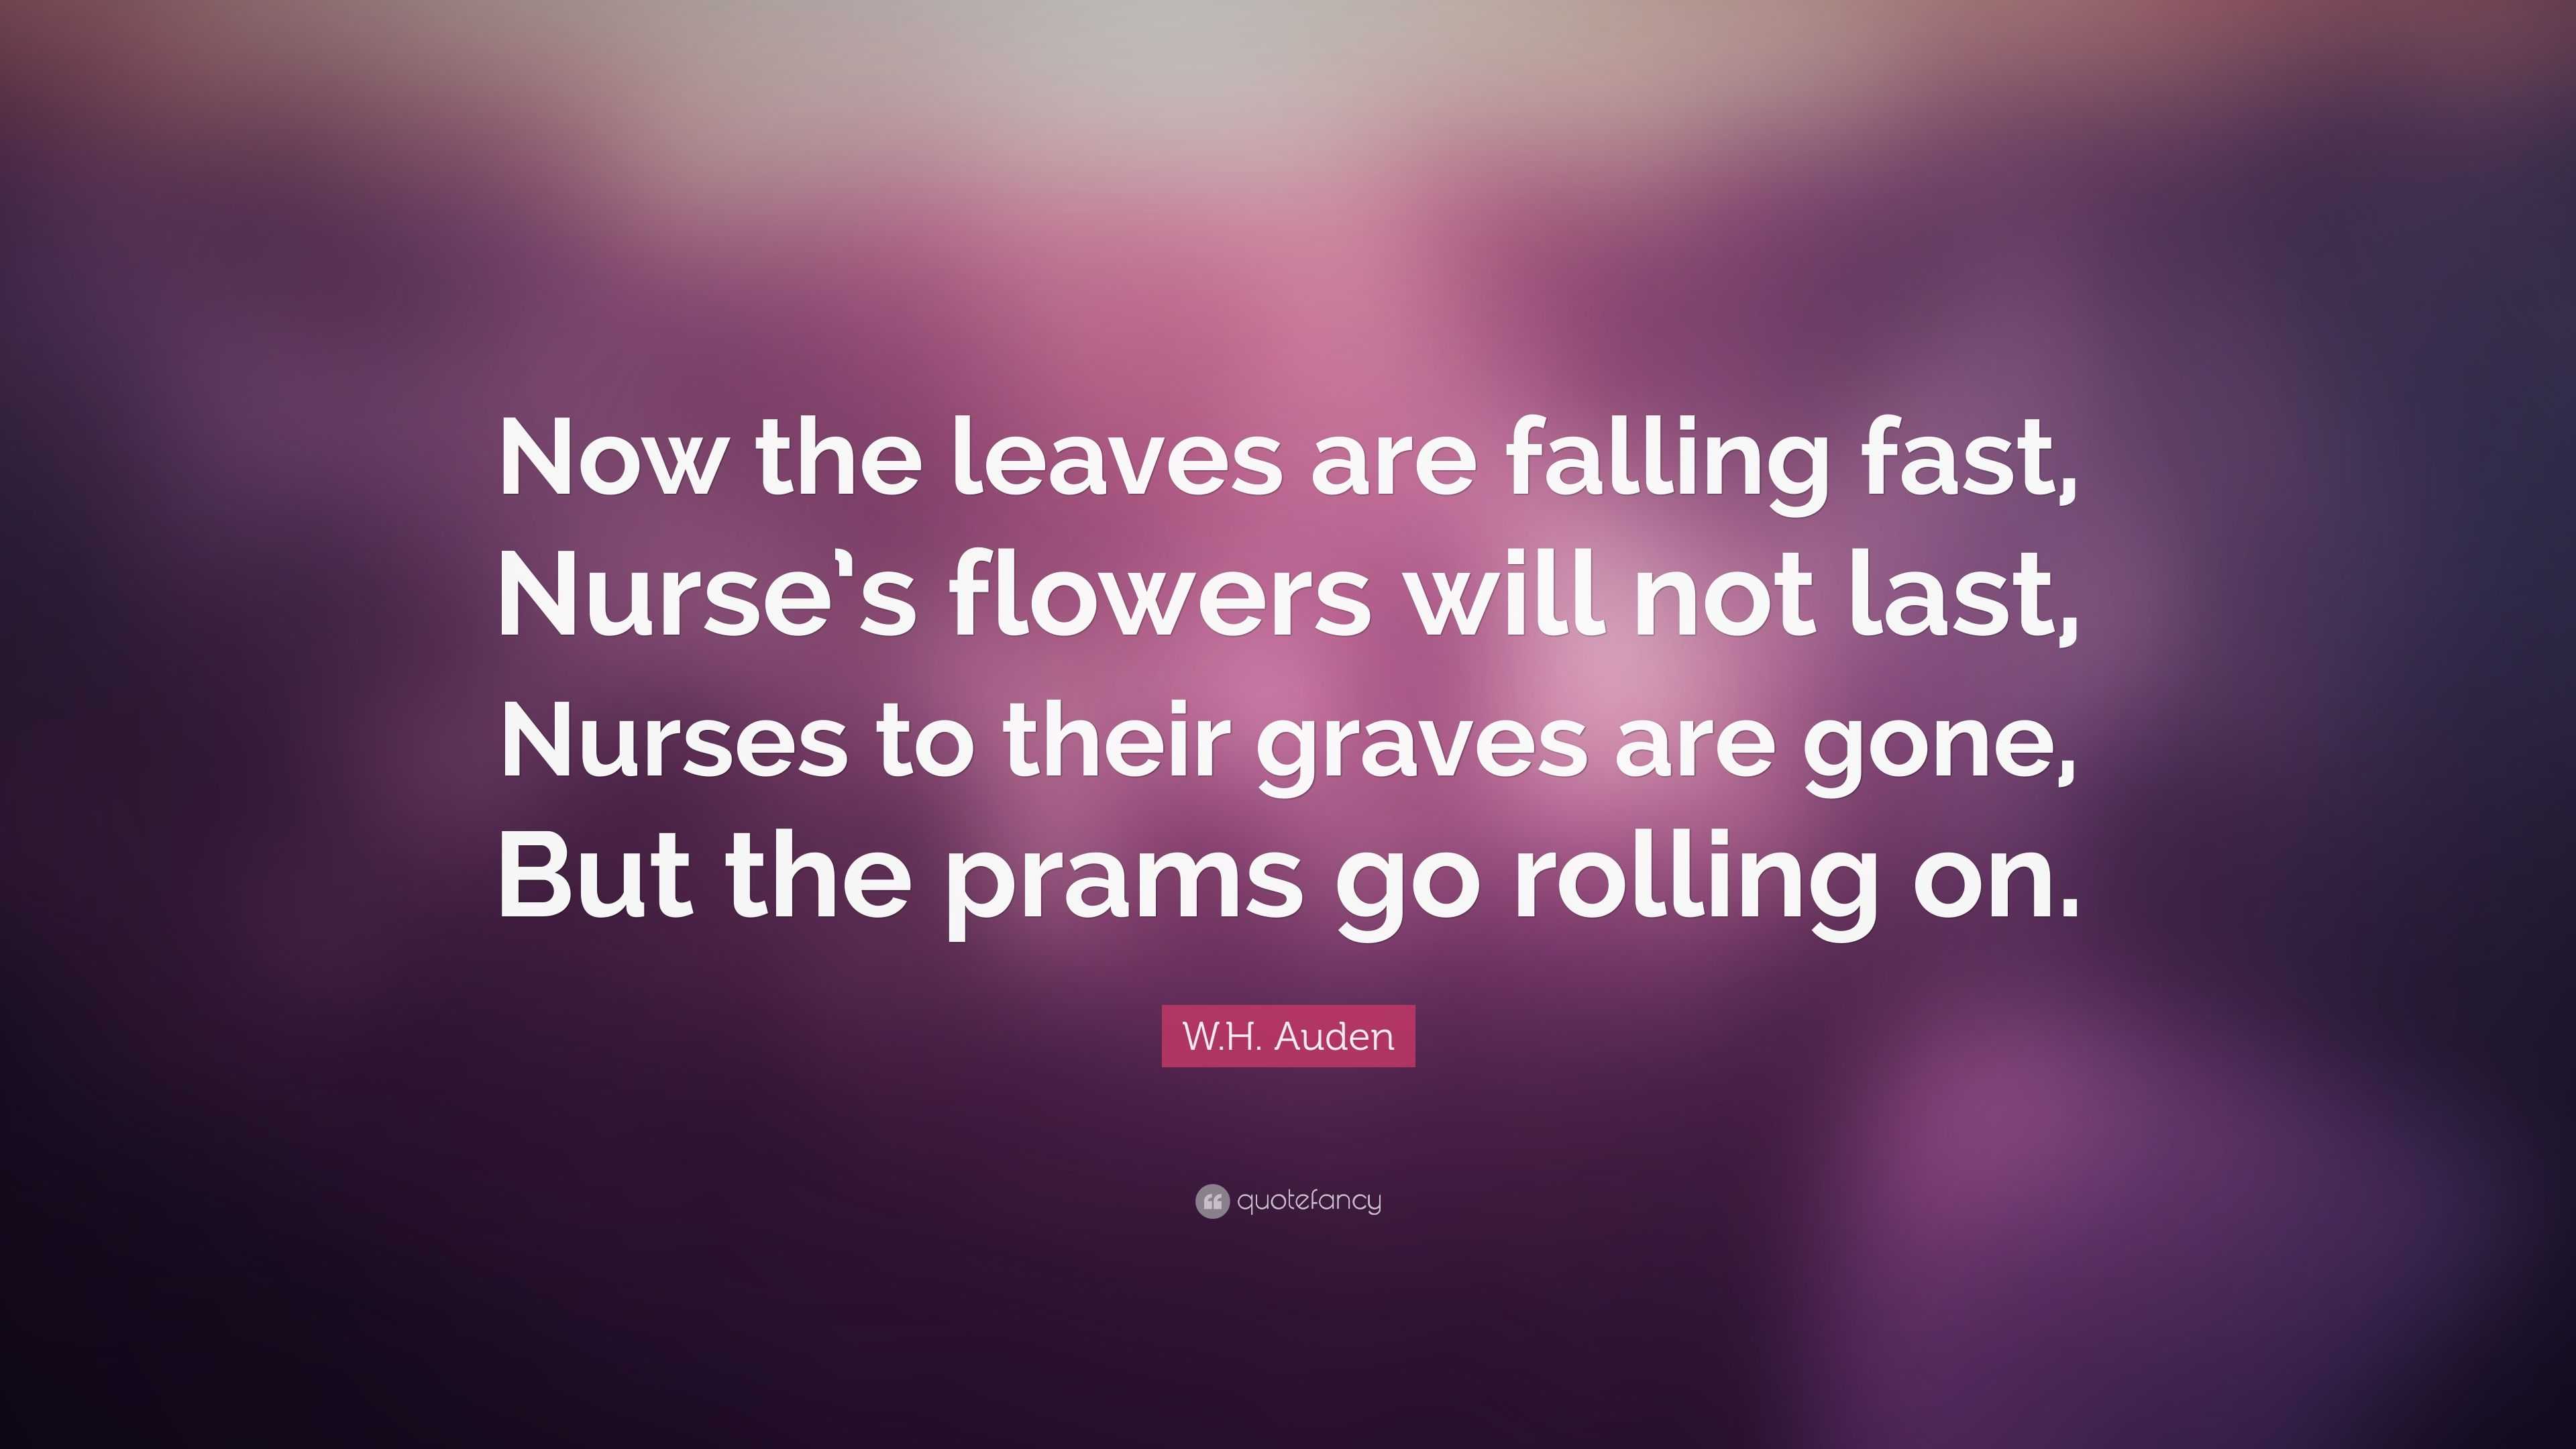 W.H. Auden Quote: “Now the leaves are falling fast, Nurse's flowers will  not last, Nurses to their graves are gone, But the prams go rollin”